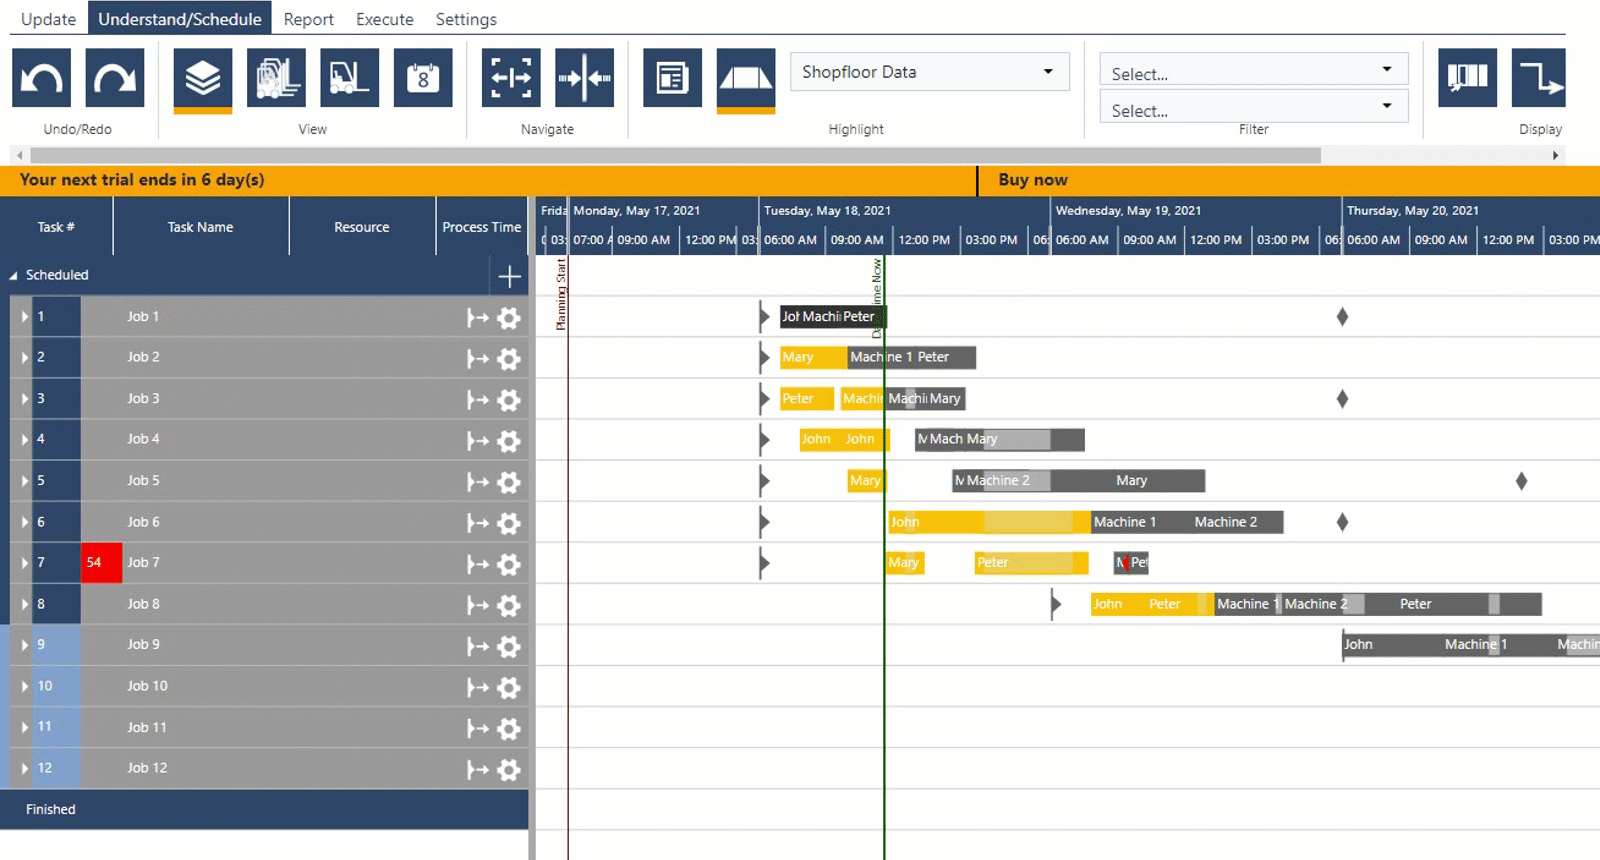 just plan it - automatic scheduling combined with manual scheduling